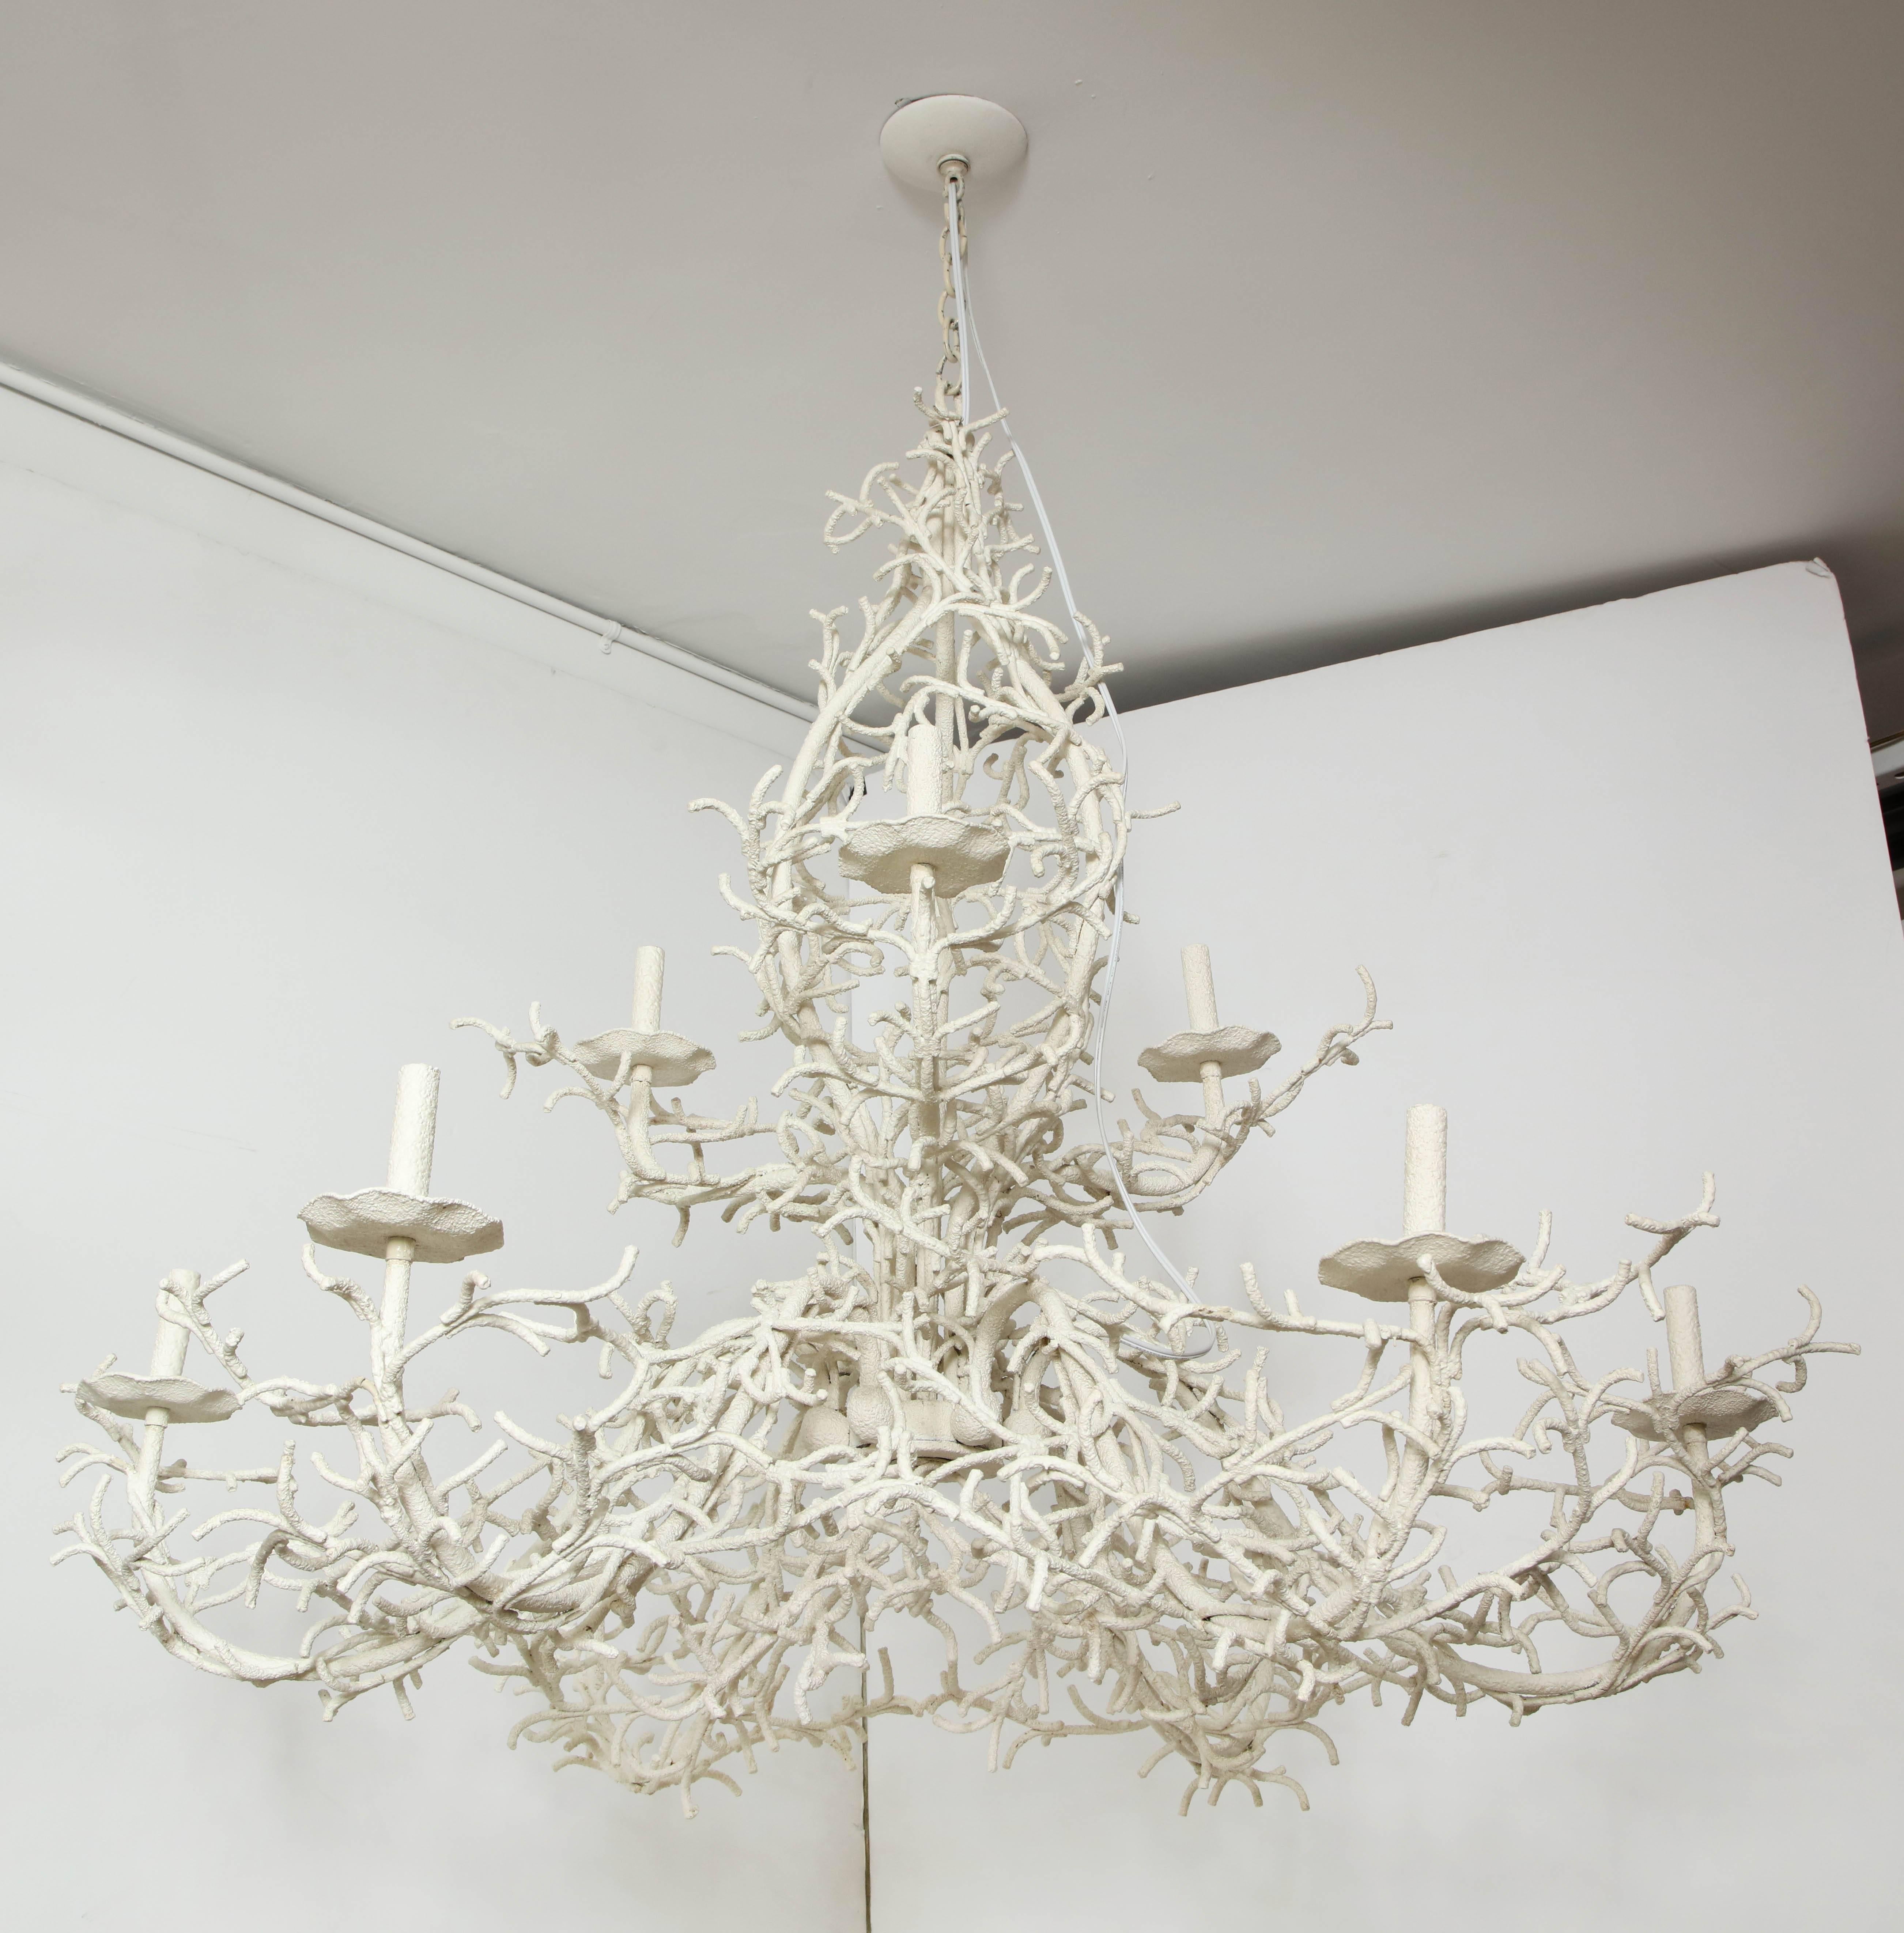 An exceptionally striking painted iron coral-like chandelier. This gem can take centre stage in a room and is special because of its large size and beautiful detailing. The lower tier consists of six arms, stemming from a centre disc, and the upper